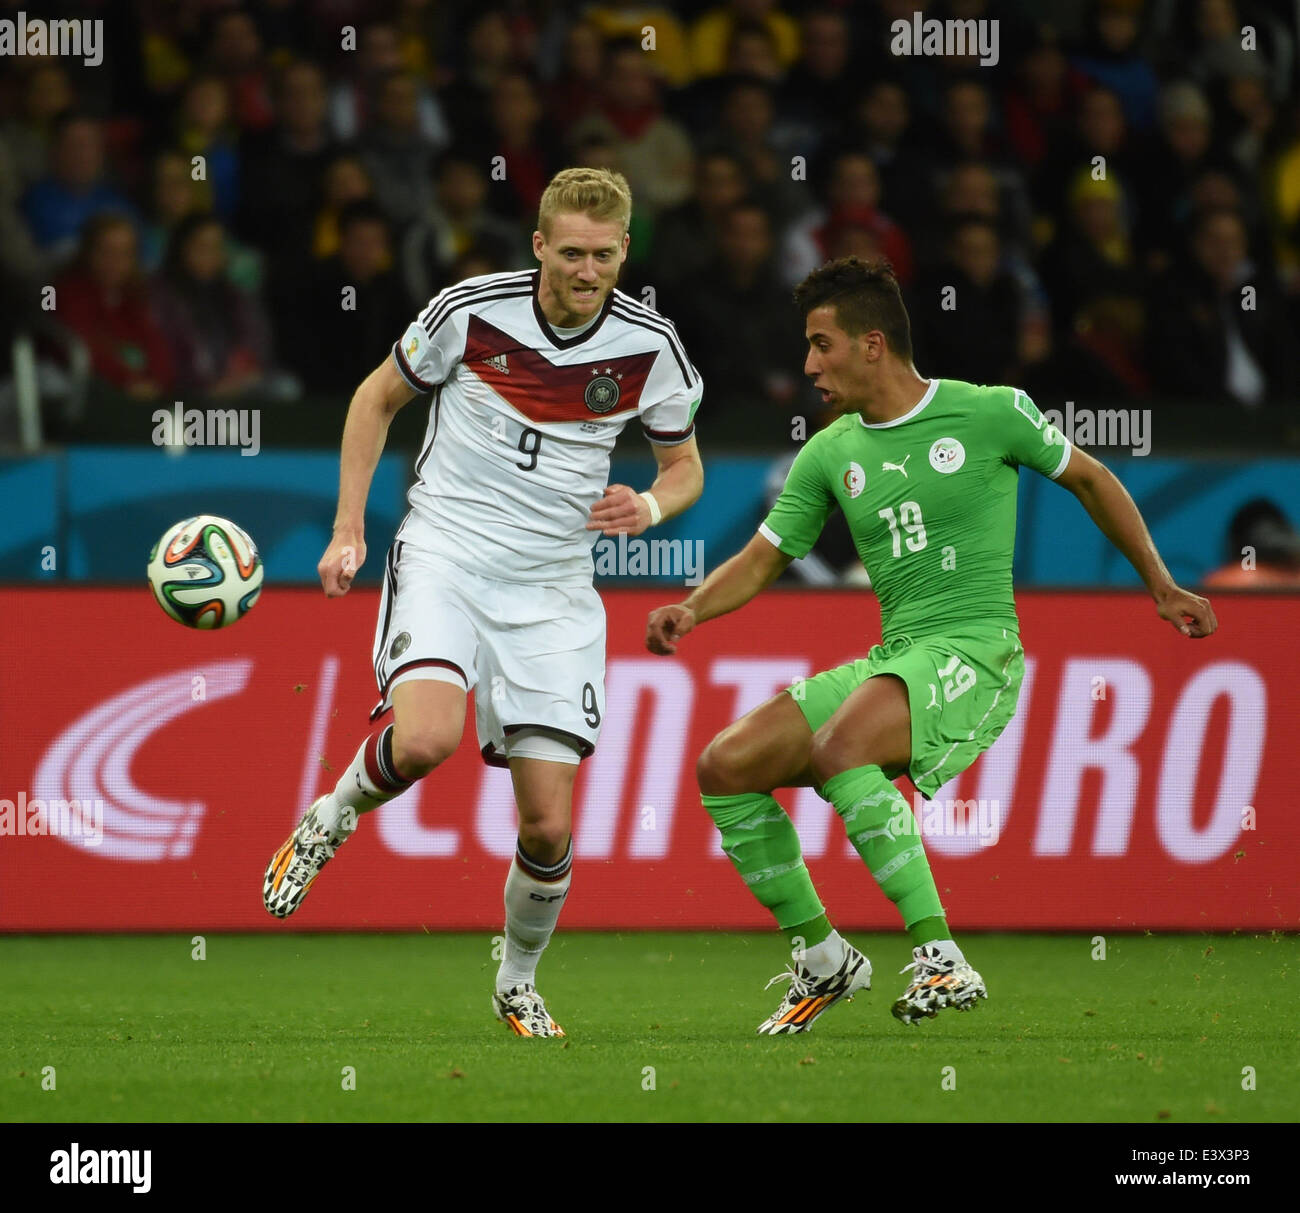 Porto Alegre, Brazil. 30th June, 2014. Algeria's Saphir Taider (R) vies with Germany's Andre Schurrle during a Round of 16 match between Germany and Algeria of 2014 FIFA World Cup at the Estadio Beira-Rio Stadium in Porto Alegre, Brazil, on June 30, 2014. Germany won 2-1 over Algeria after 120 minutes and qualified for quarter-finals on Monday. Credit:  Li Ga/Xinhua/Alamy Live News Stock Photo